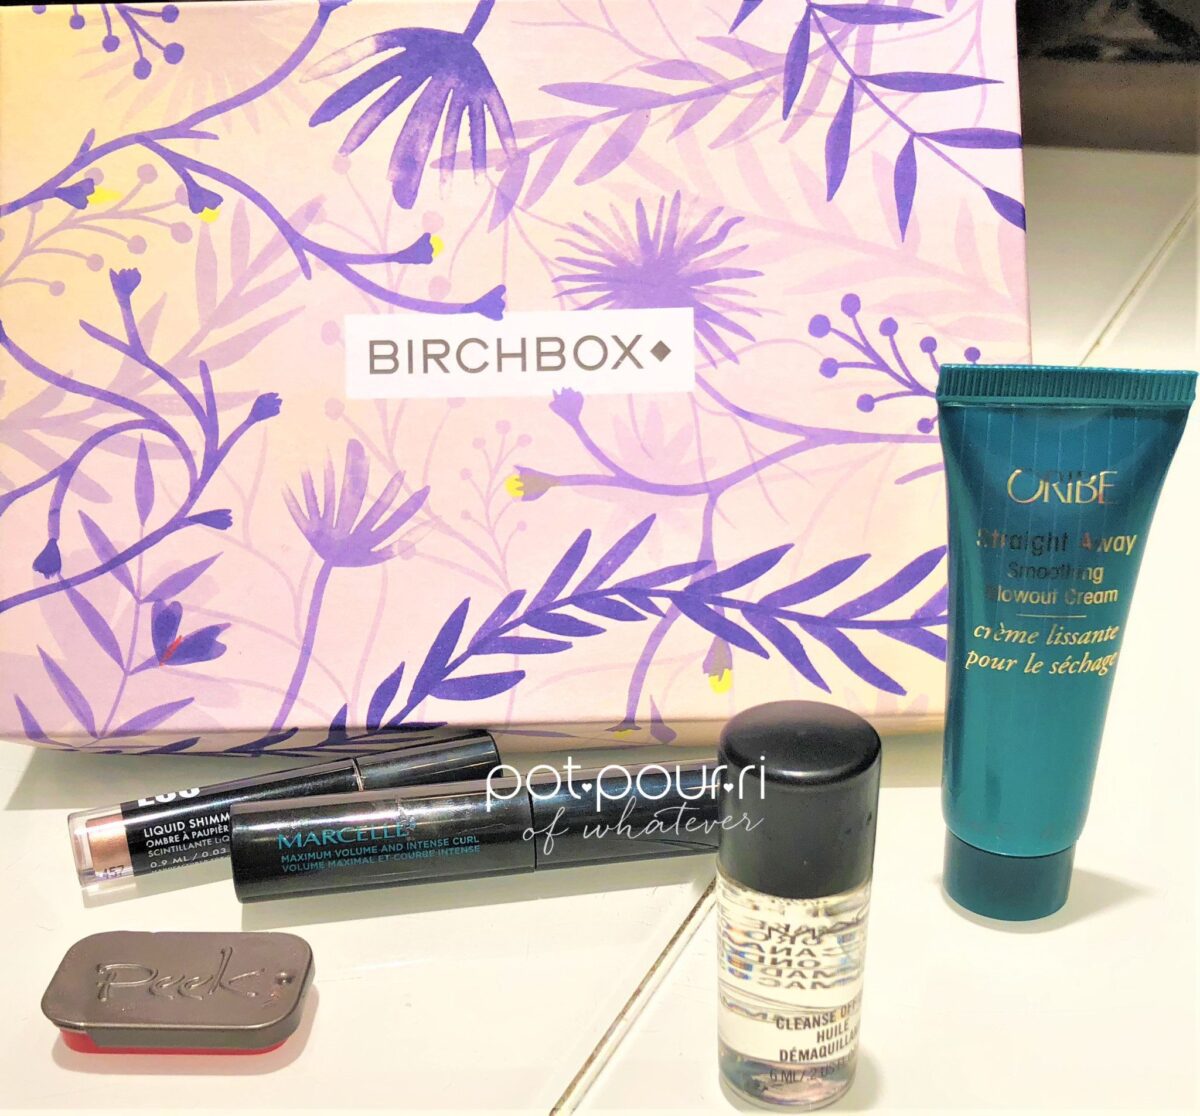 Unboxing Spring and Woman's History Month Themed samples for March 2016